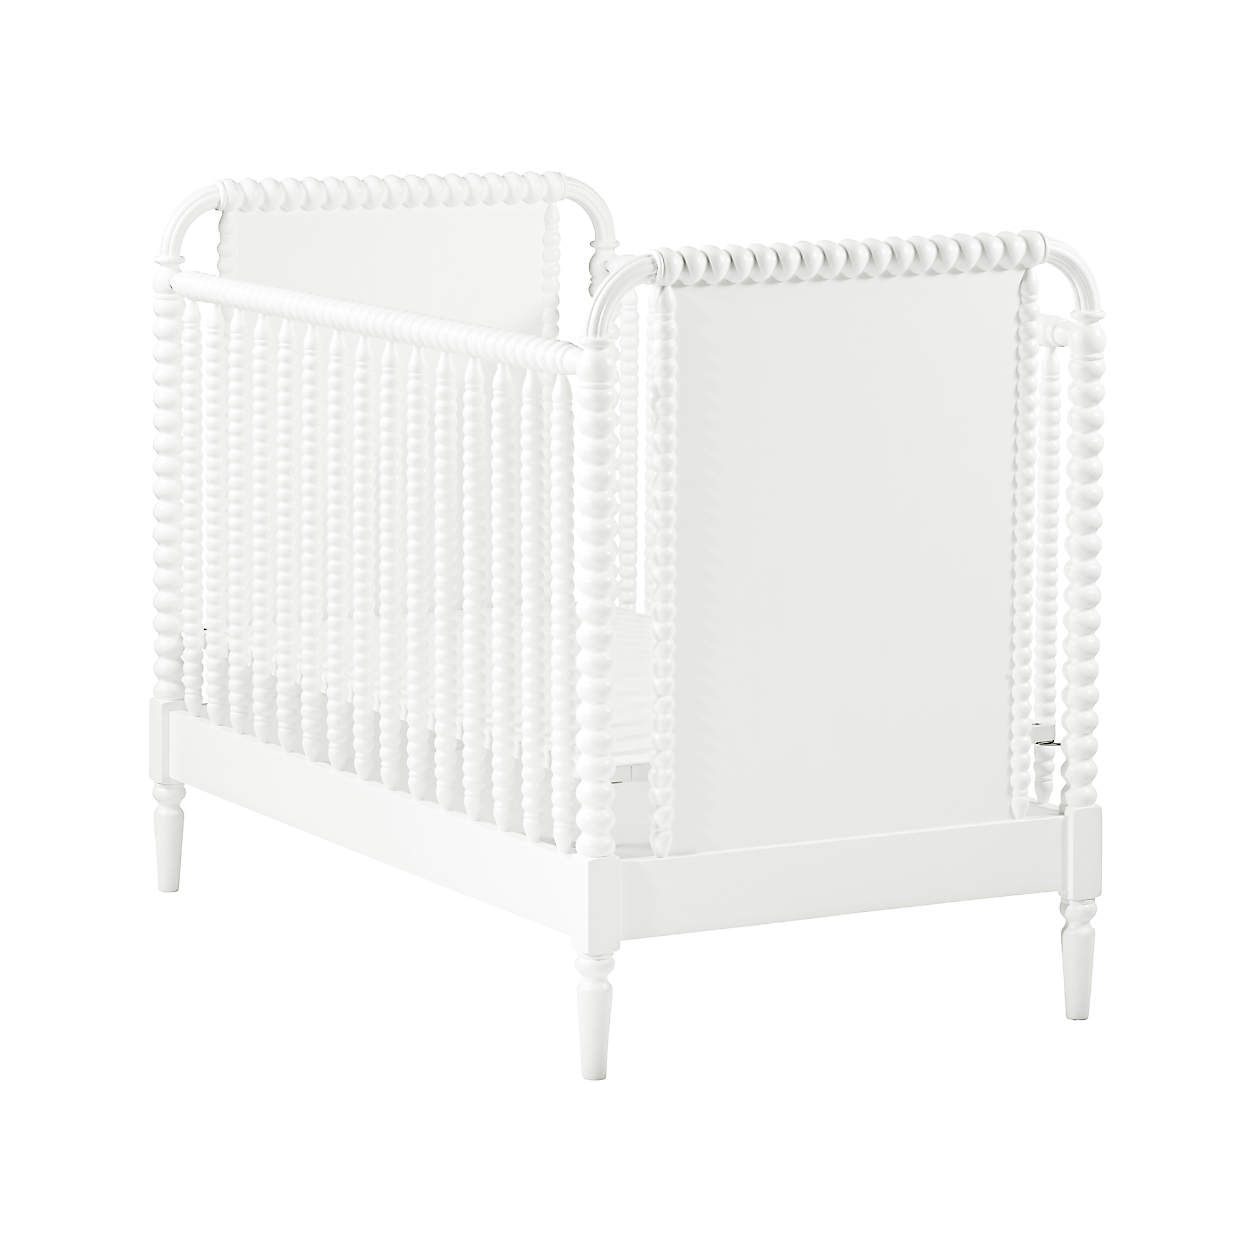 White Jenny Lind Crib + Reviews | Crate and Barrel | Crate & Barrel